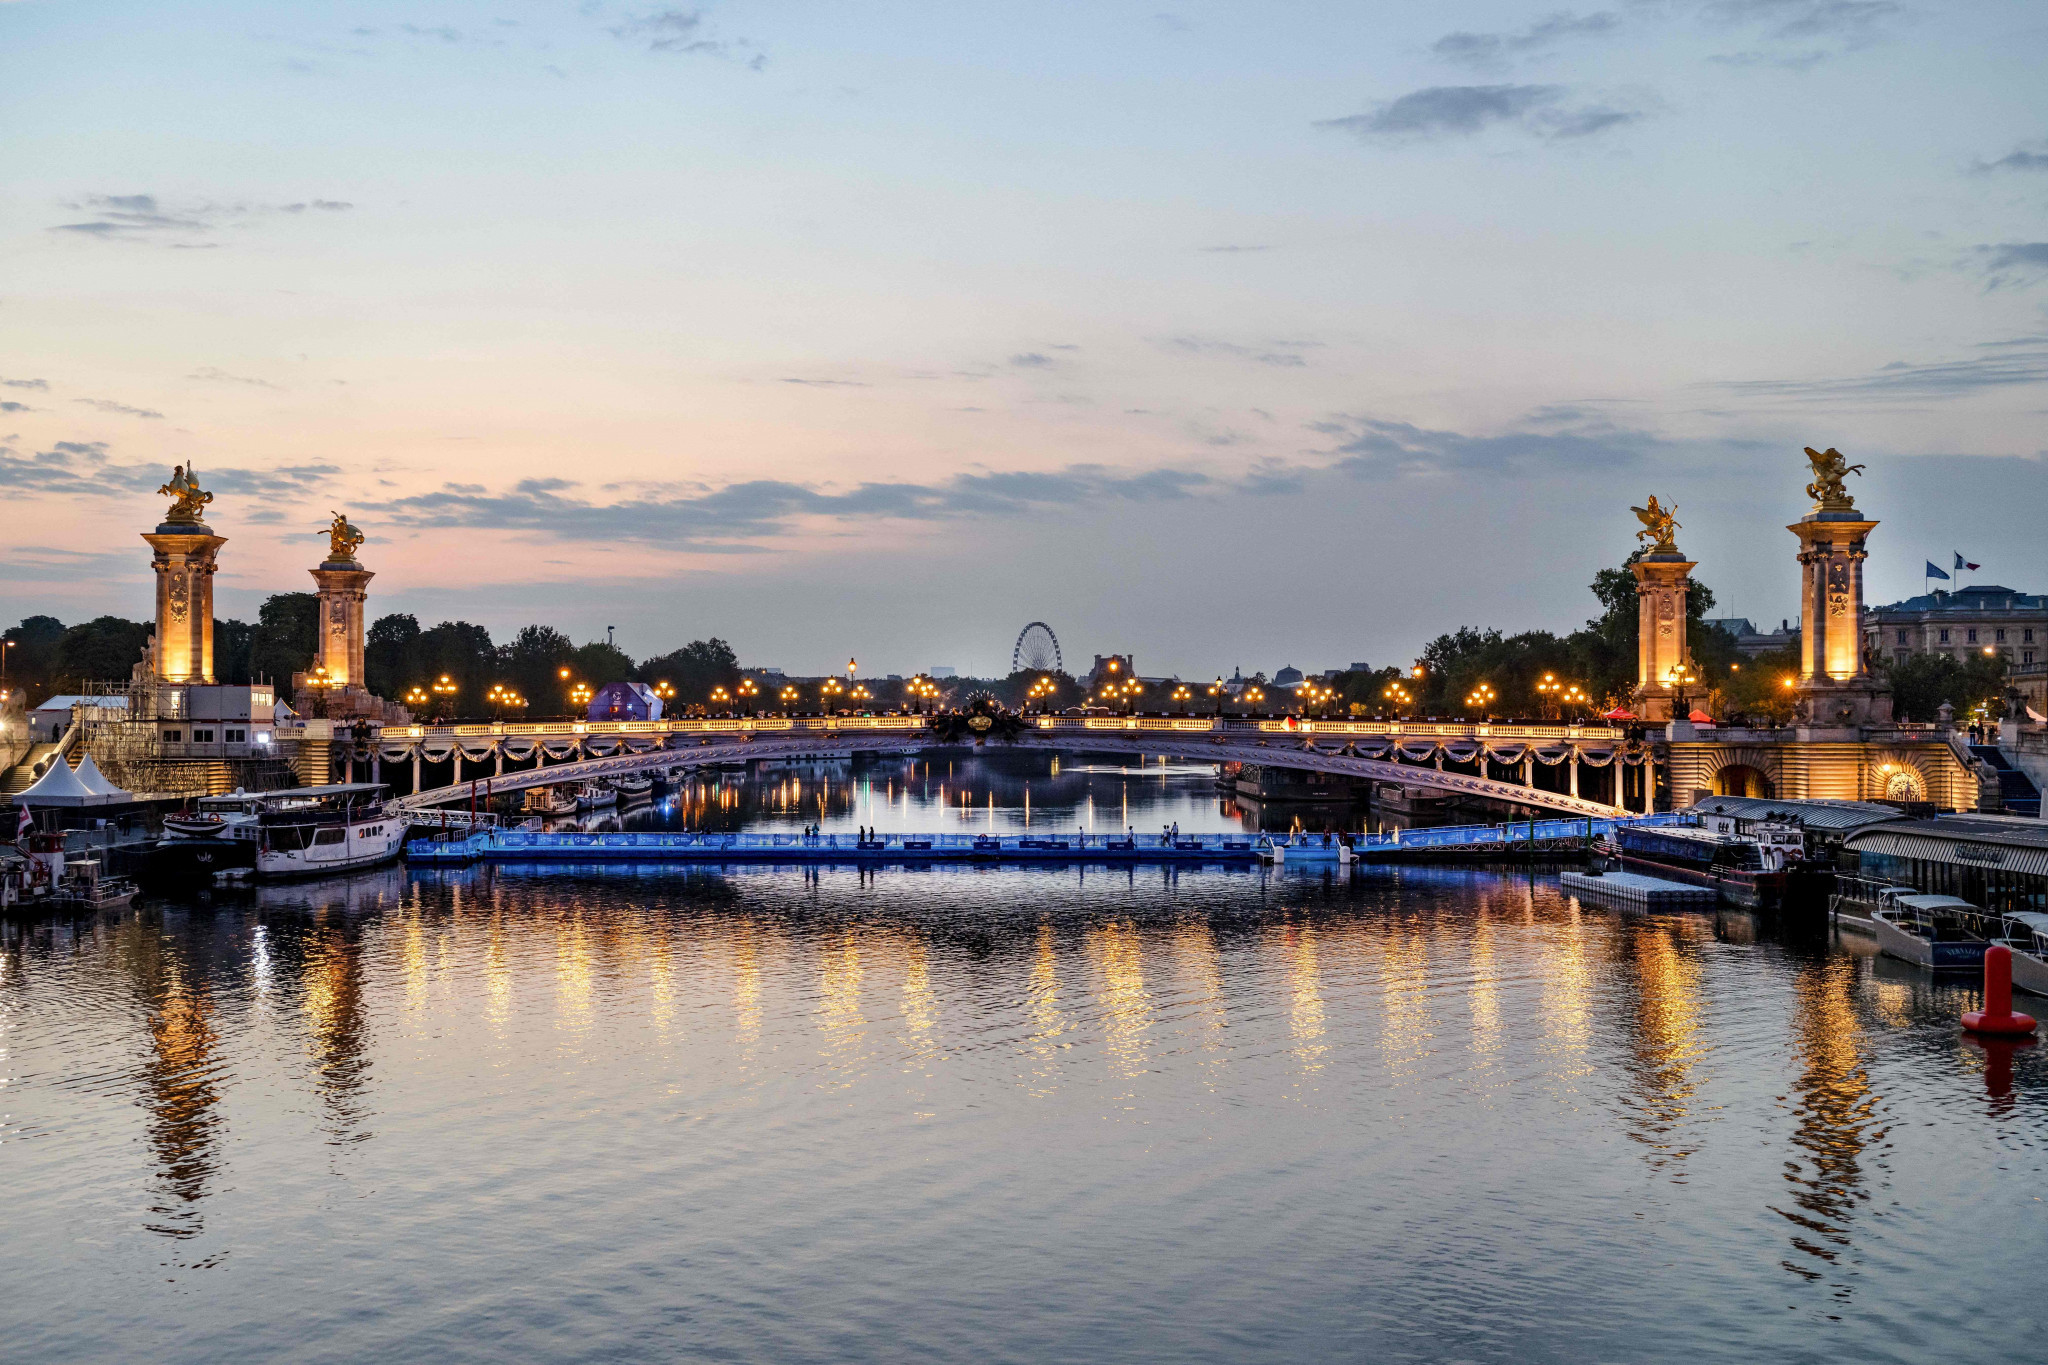 Paris 2024 teams up with VNF to "integrate" Seine during Olympics and Paralympics